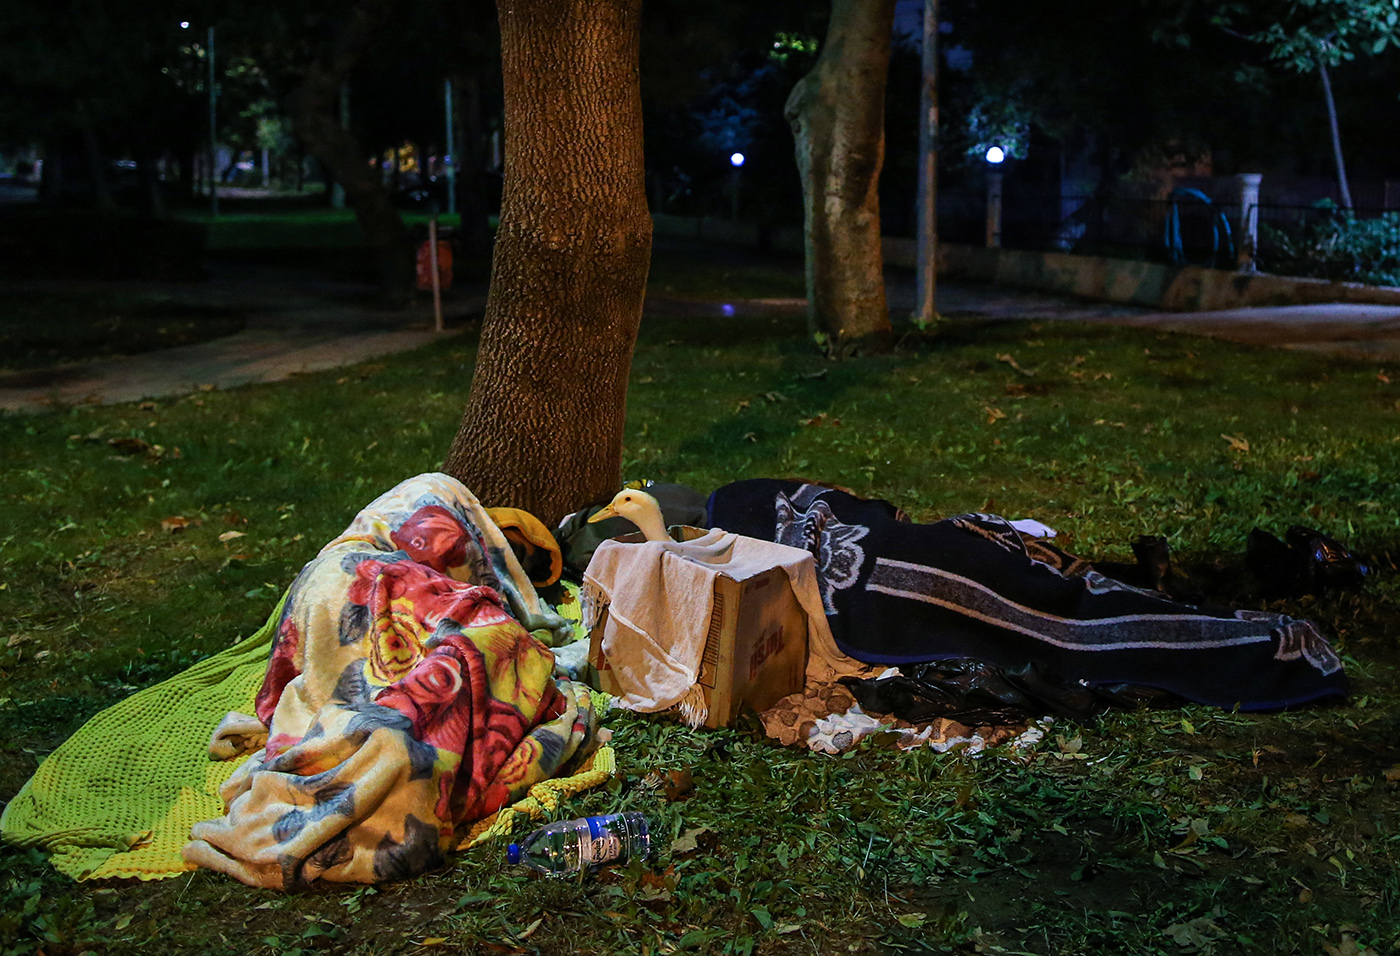 People sleep at a park after a 7.0 magnitude earthquake in the Aegean Sea, at Bayrakli district in Izmir, Turkey, 31 October 2020. According to Turkish media reports, at least twenty four people died while more than eight  hundreds were injured and dozens of buildings were destroyed in the earthquake.